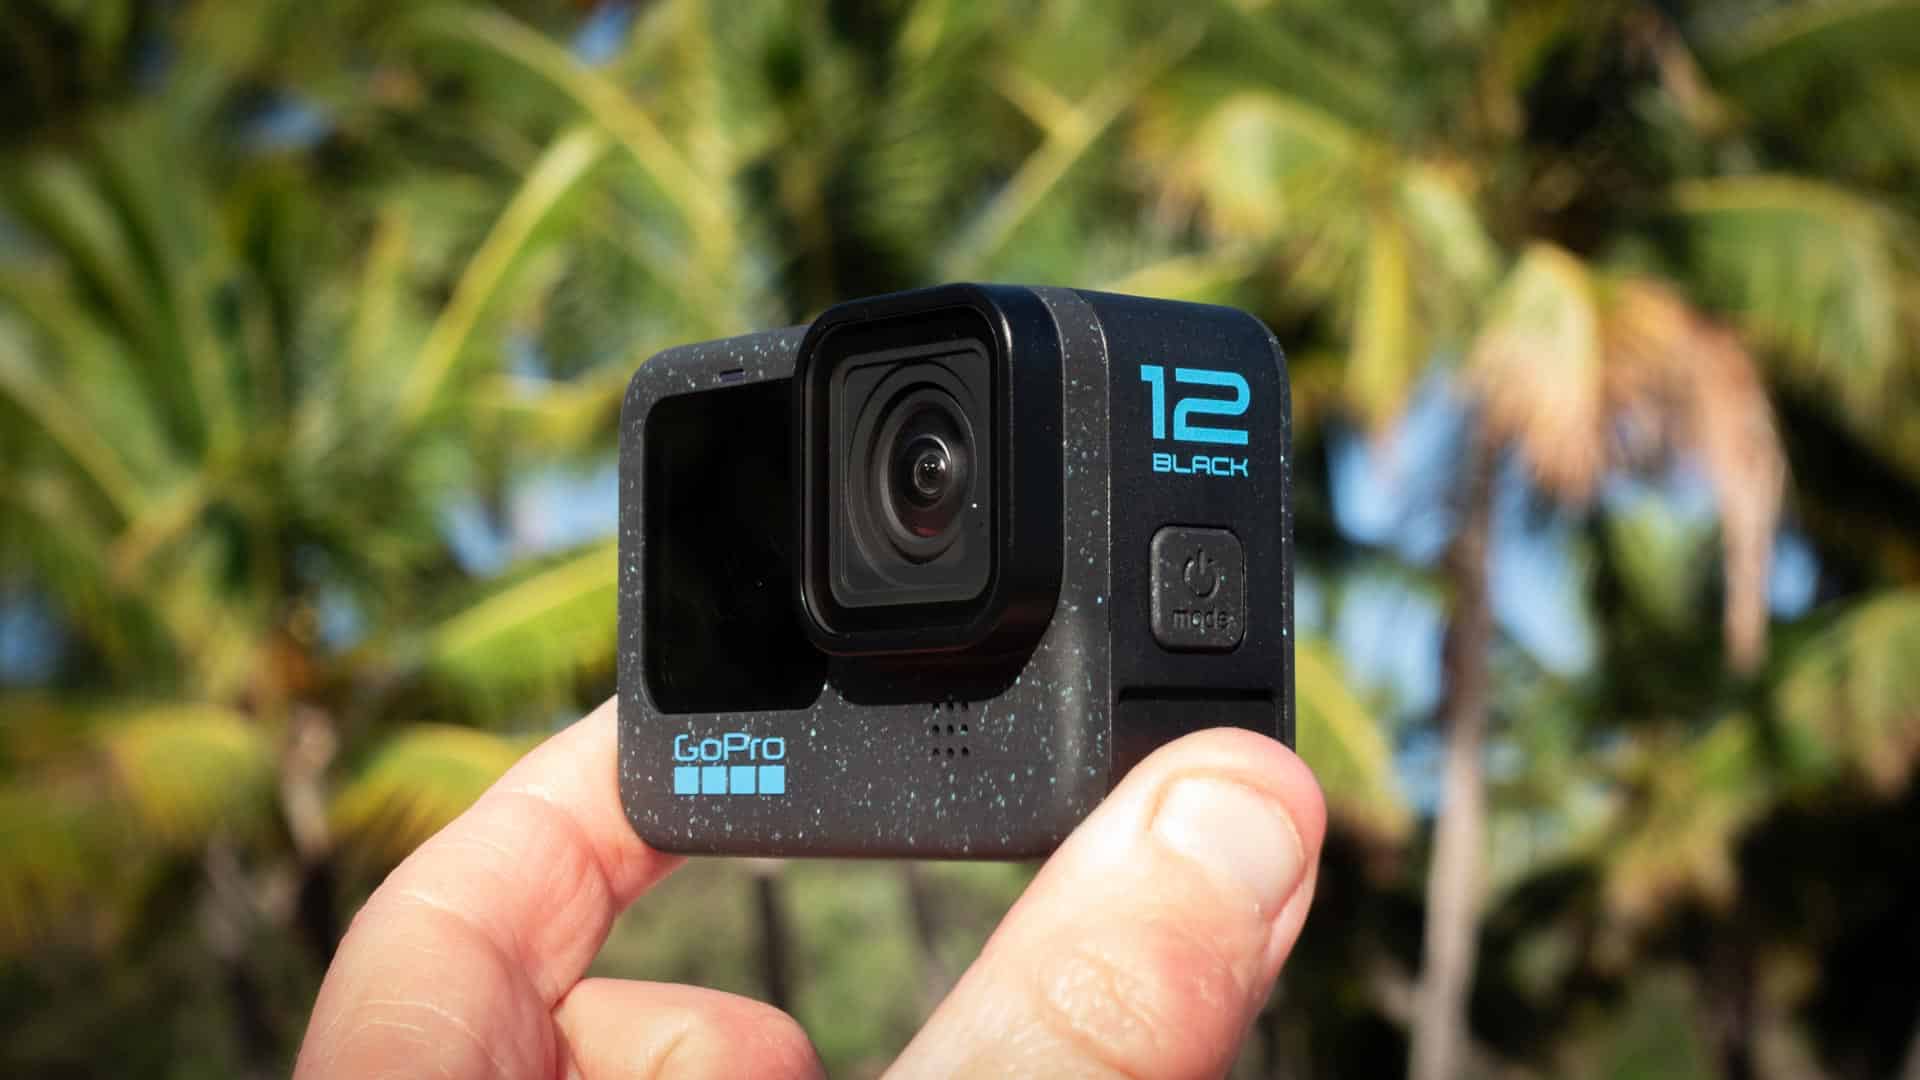 GoPro HERO12 Black - Waterproof Action Camera with 5.3K60 Ultra HD Video,  27MP Photos, HDR, 1/1.9 Image Sensor, Live Streaming, Webcam, Stabilization